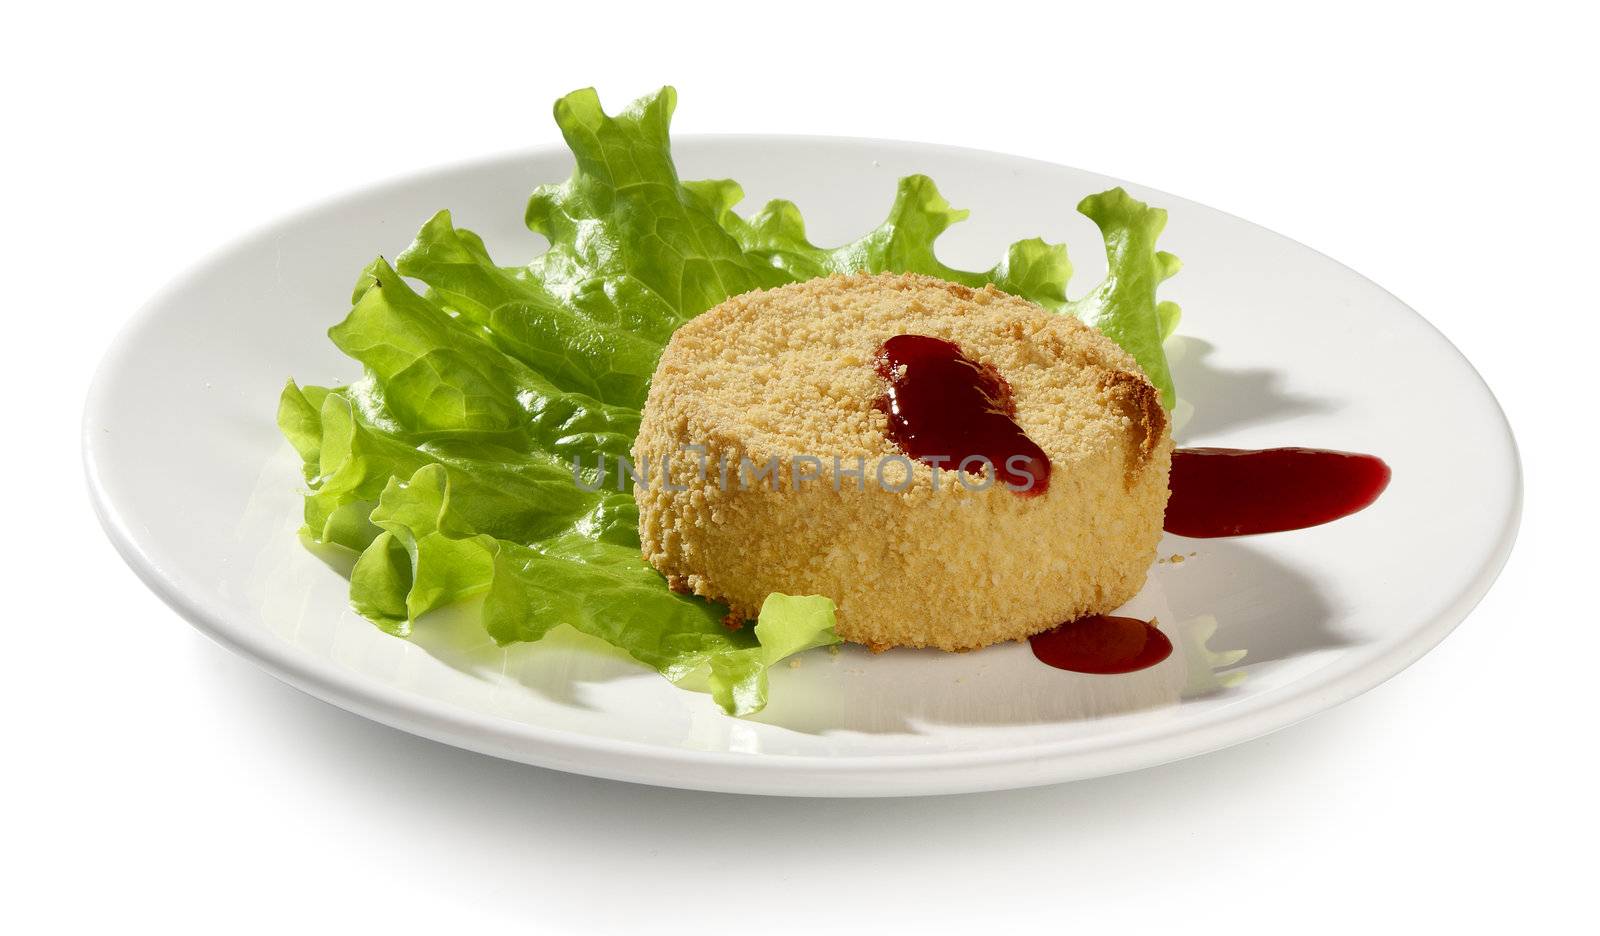 Baked camambert coated with breadcrumbs with lettuce and cowberries jam on the plate